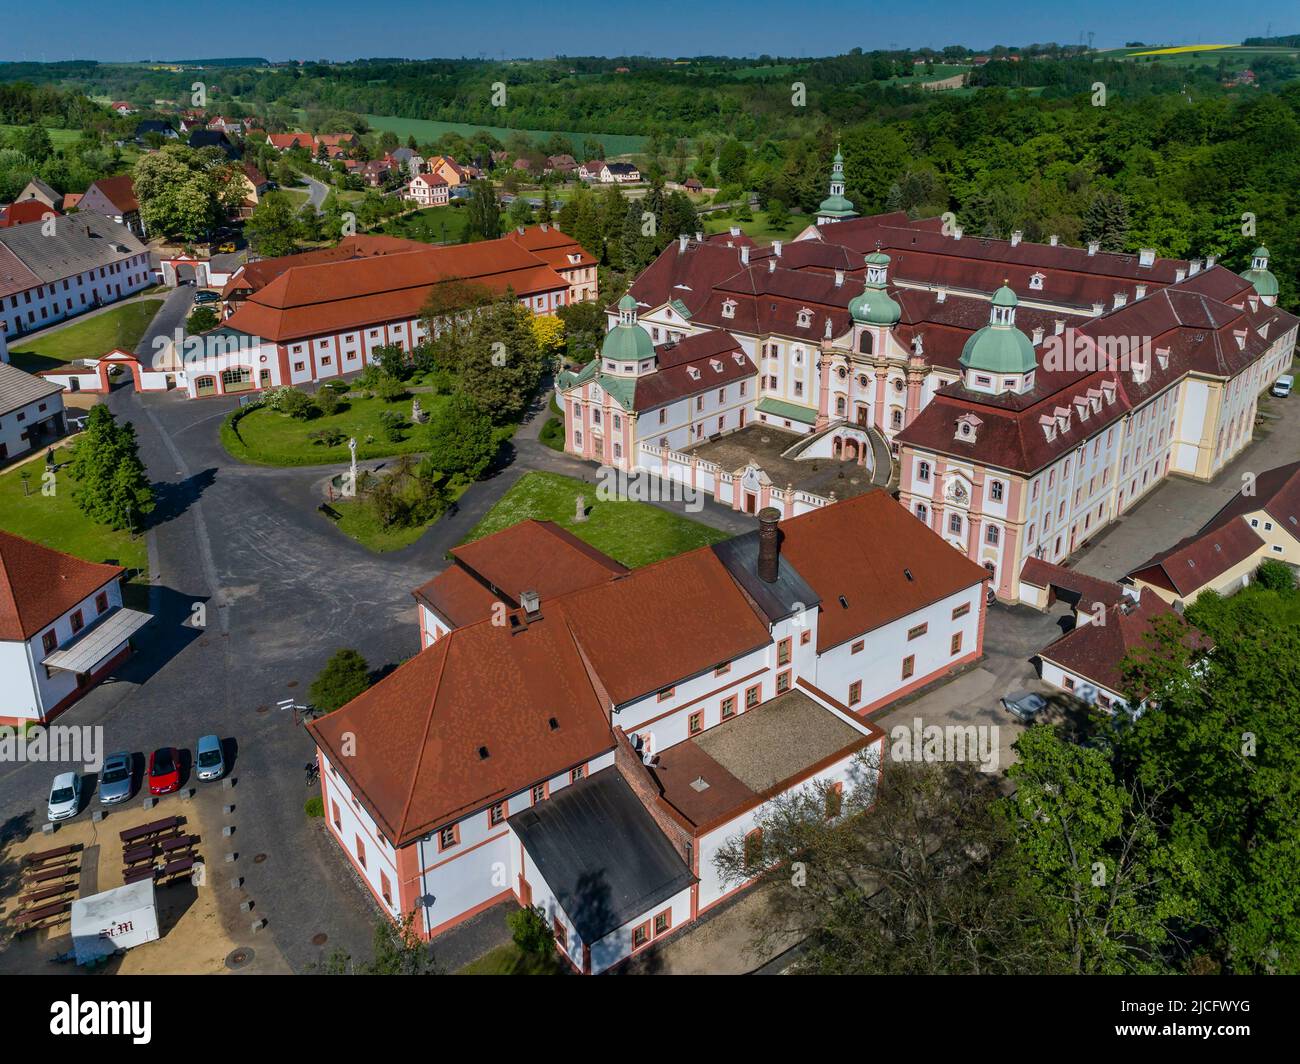 St. Marienthal Monastery in Upper Lusatia: The St. Marienthal Monastery is located in Upper Lusatia, south of Görlitz in Ostritz on the Neisse border with Poland. It is the oldest nunnery of the Cistercian order in Germany Stock Photo